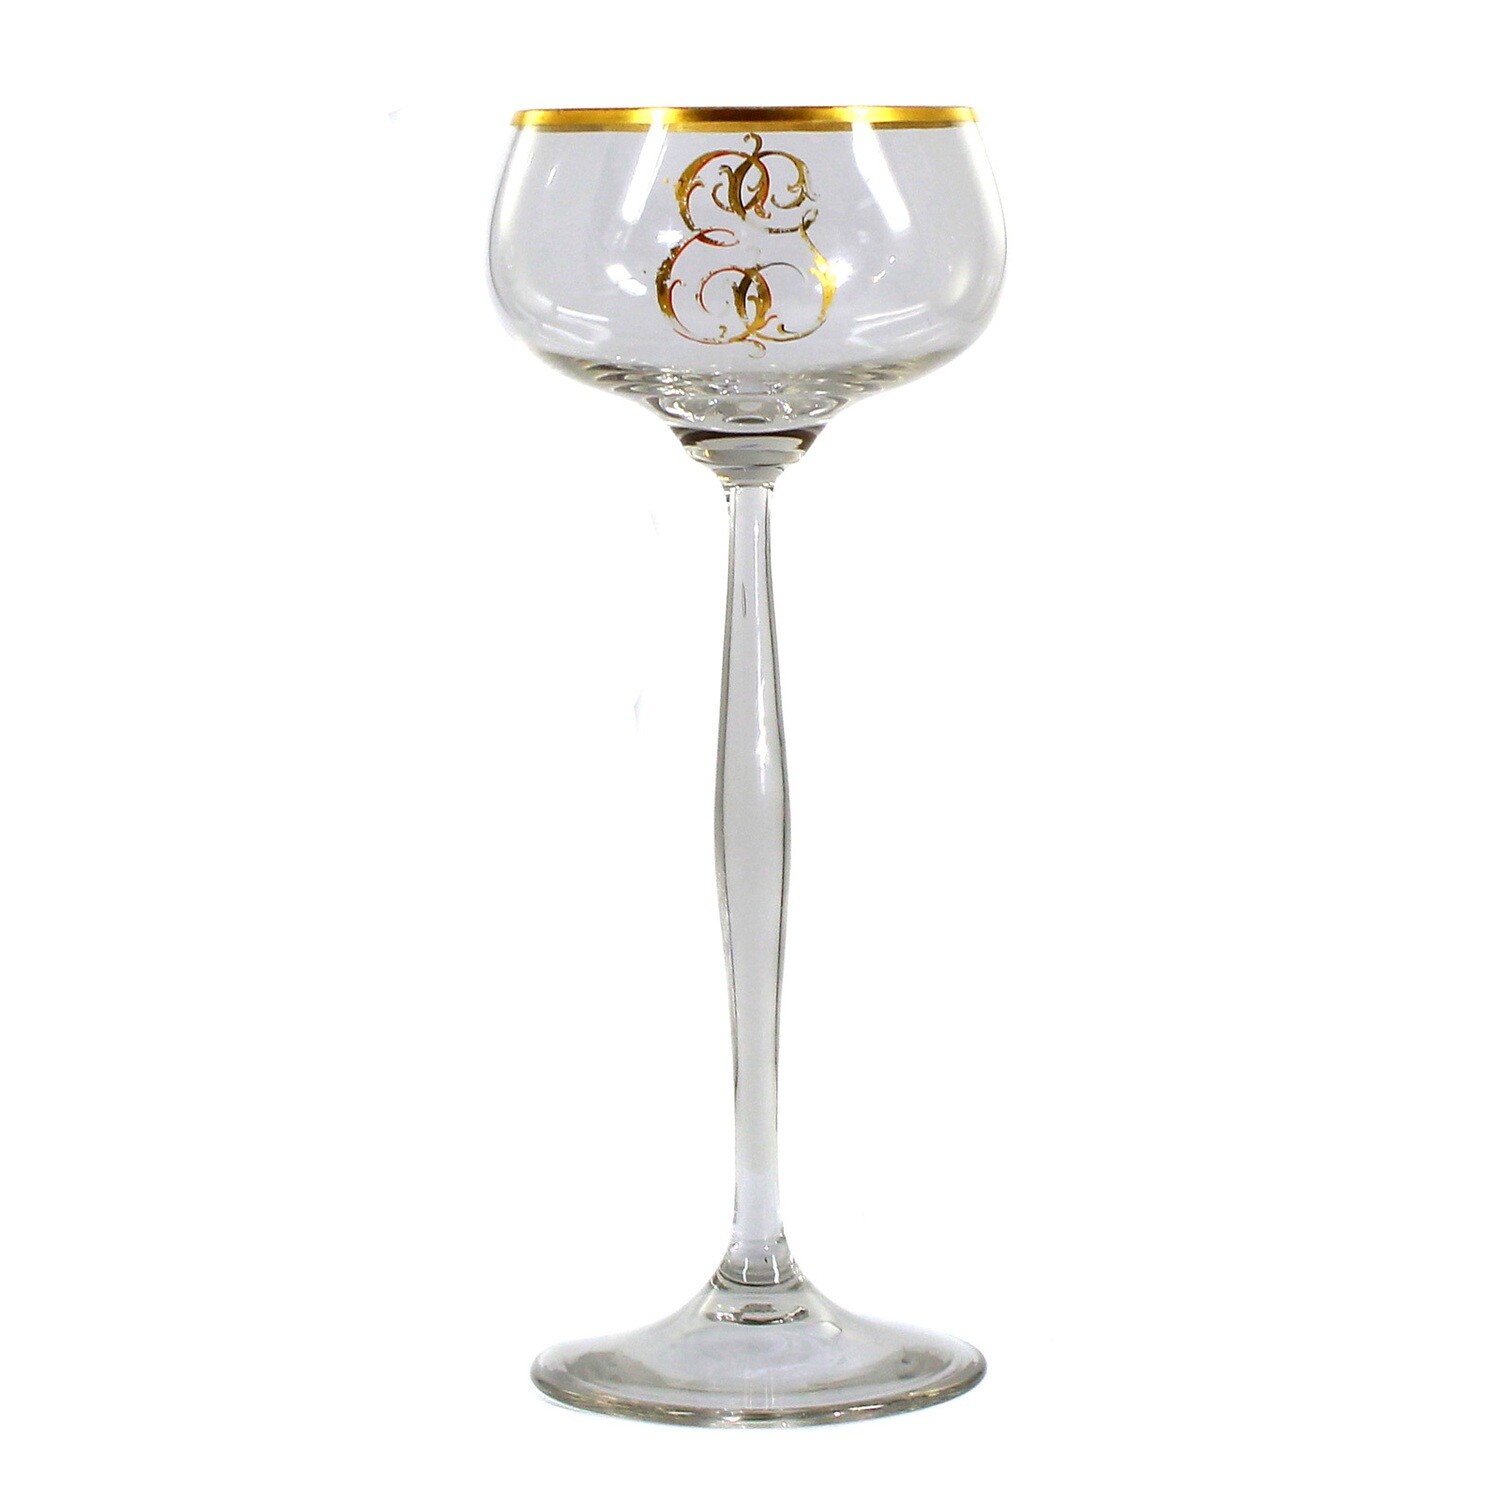 Stem glass with ligature monogram in polished gold, Theresienthal, form 1496